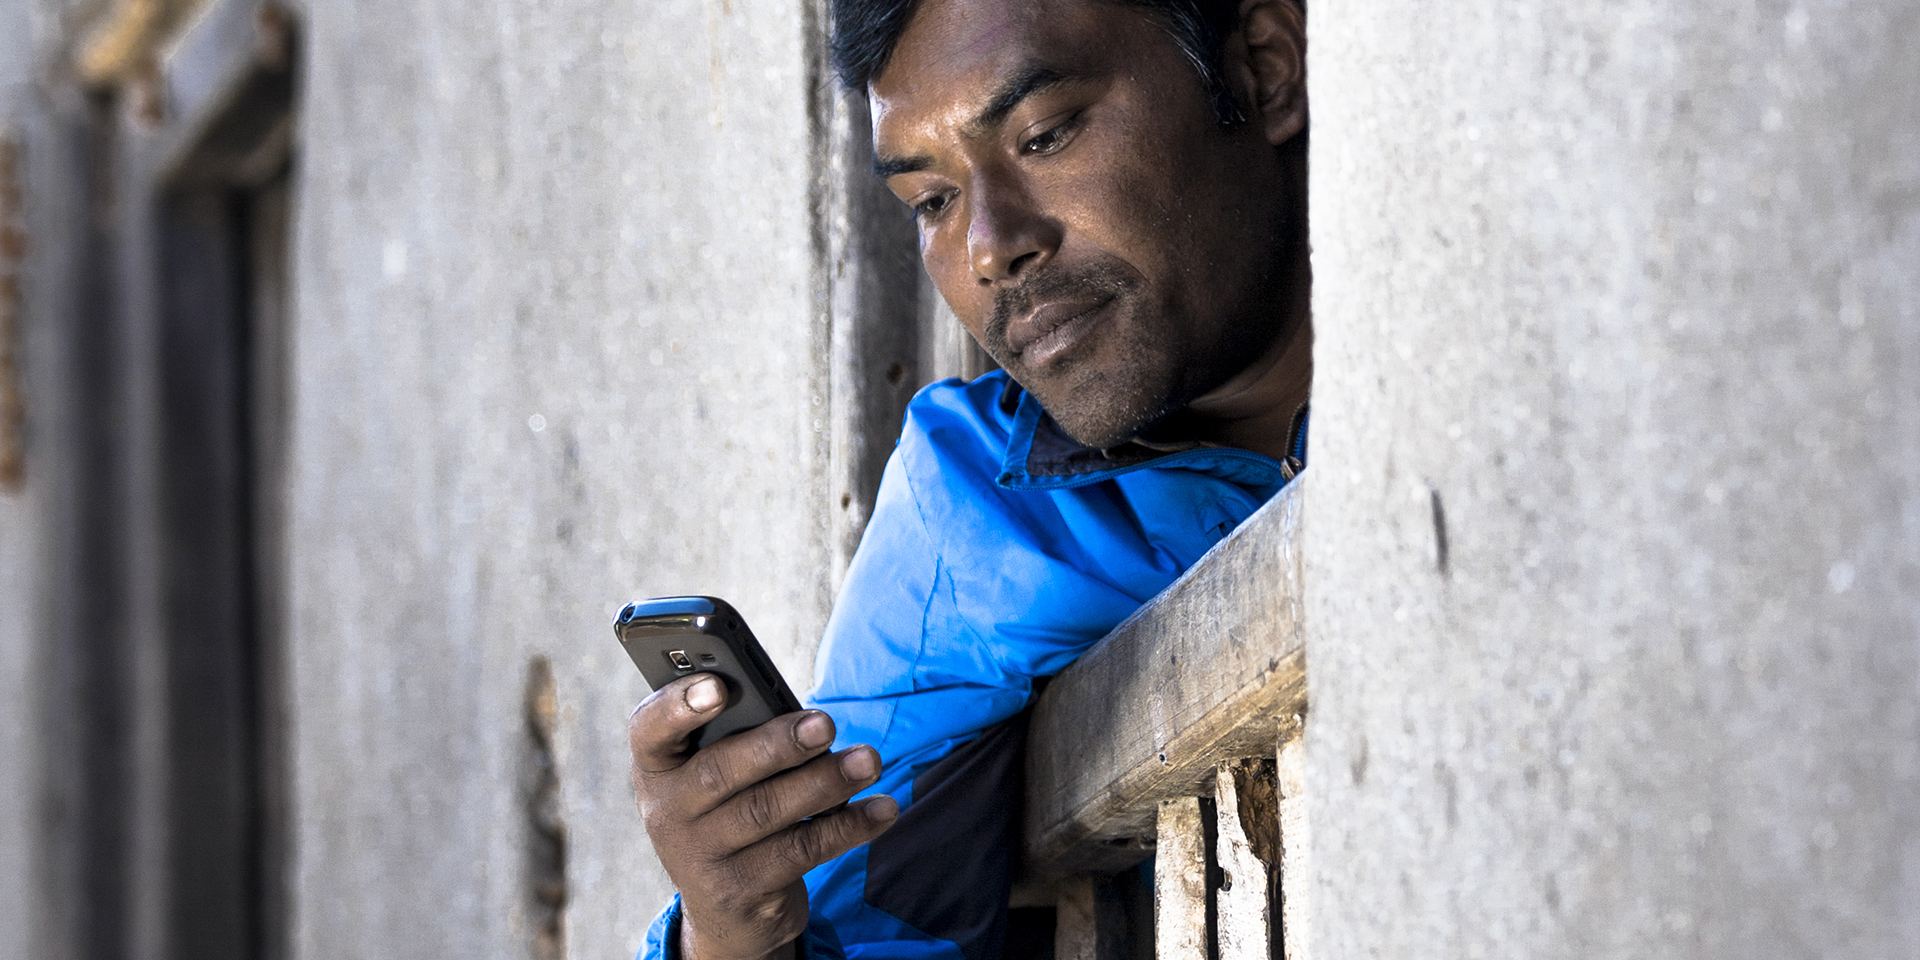 Image of a man leaning over the side of a balcony guard while looking at his cell phone.